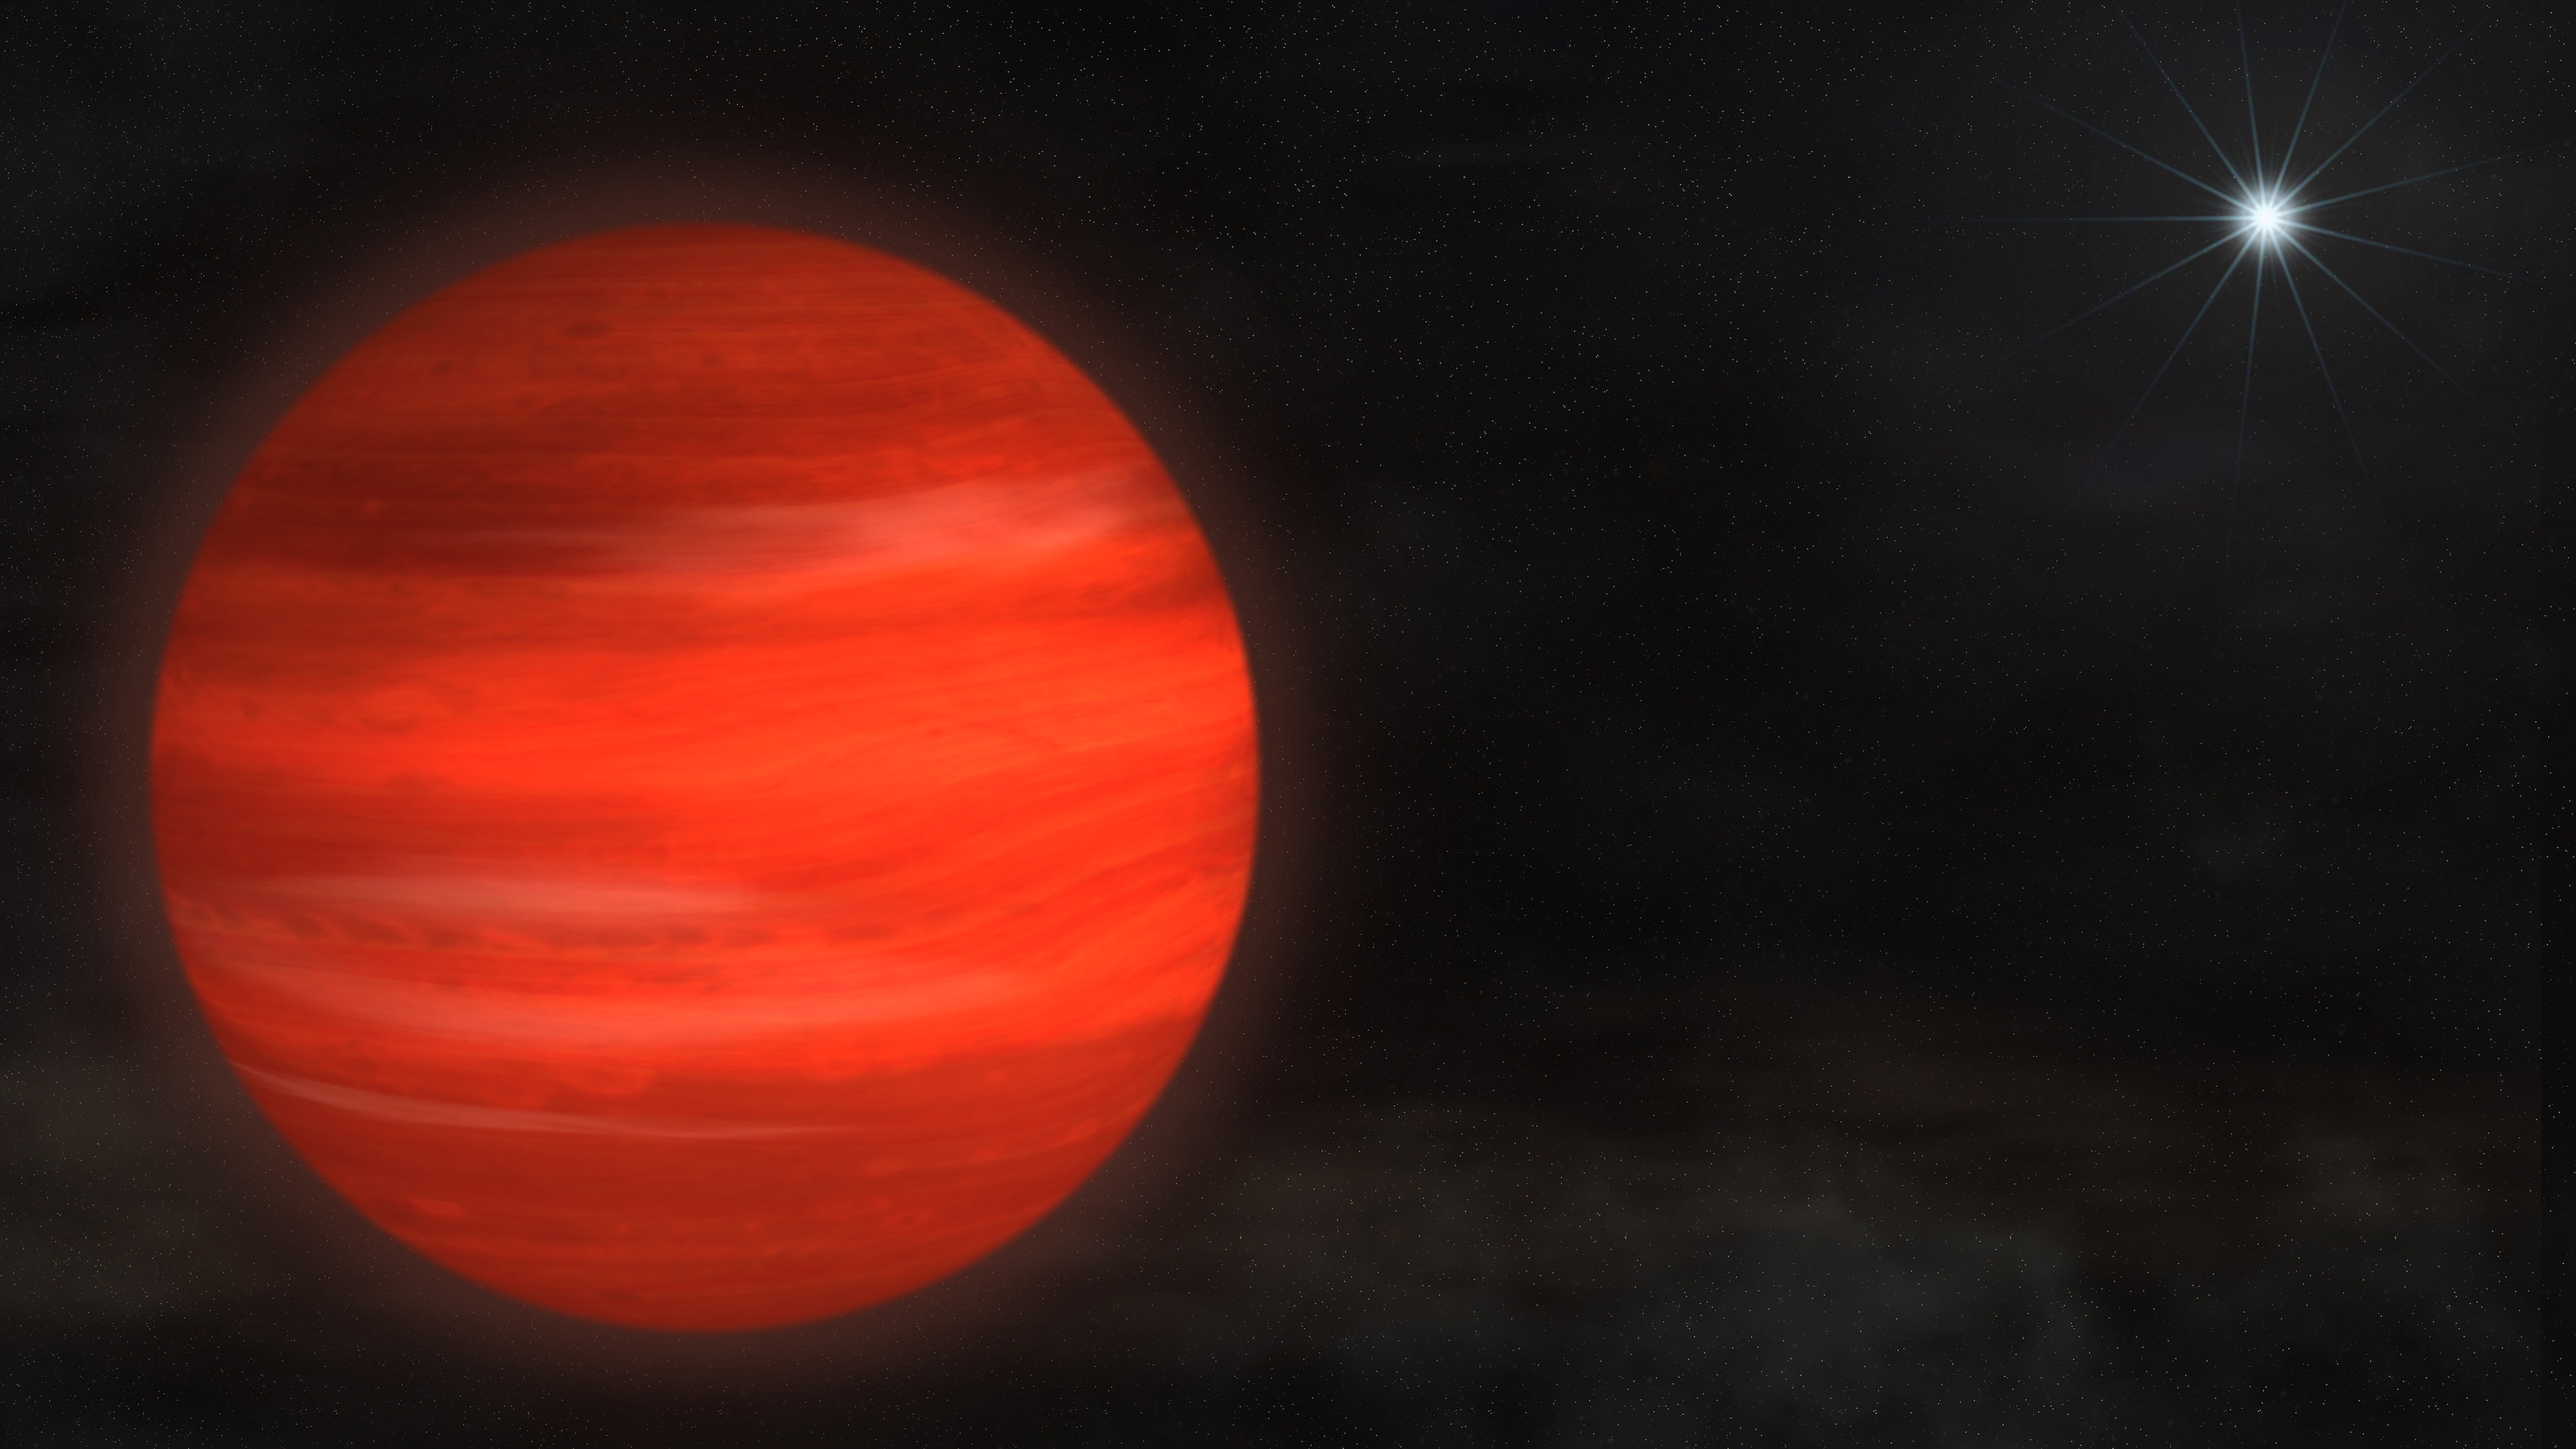 The "super-Jupiter" Kappa Andromedae b, shown here in an artist's rendering, circles its star at nearly twice the distance that Neptune orbits the sun. With a mass about 13 times Jupiter's, the object glows with a reddish color. Credit: NASA's Goddard Space Flight Center/S. Wiessinger